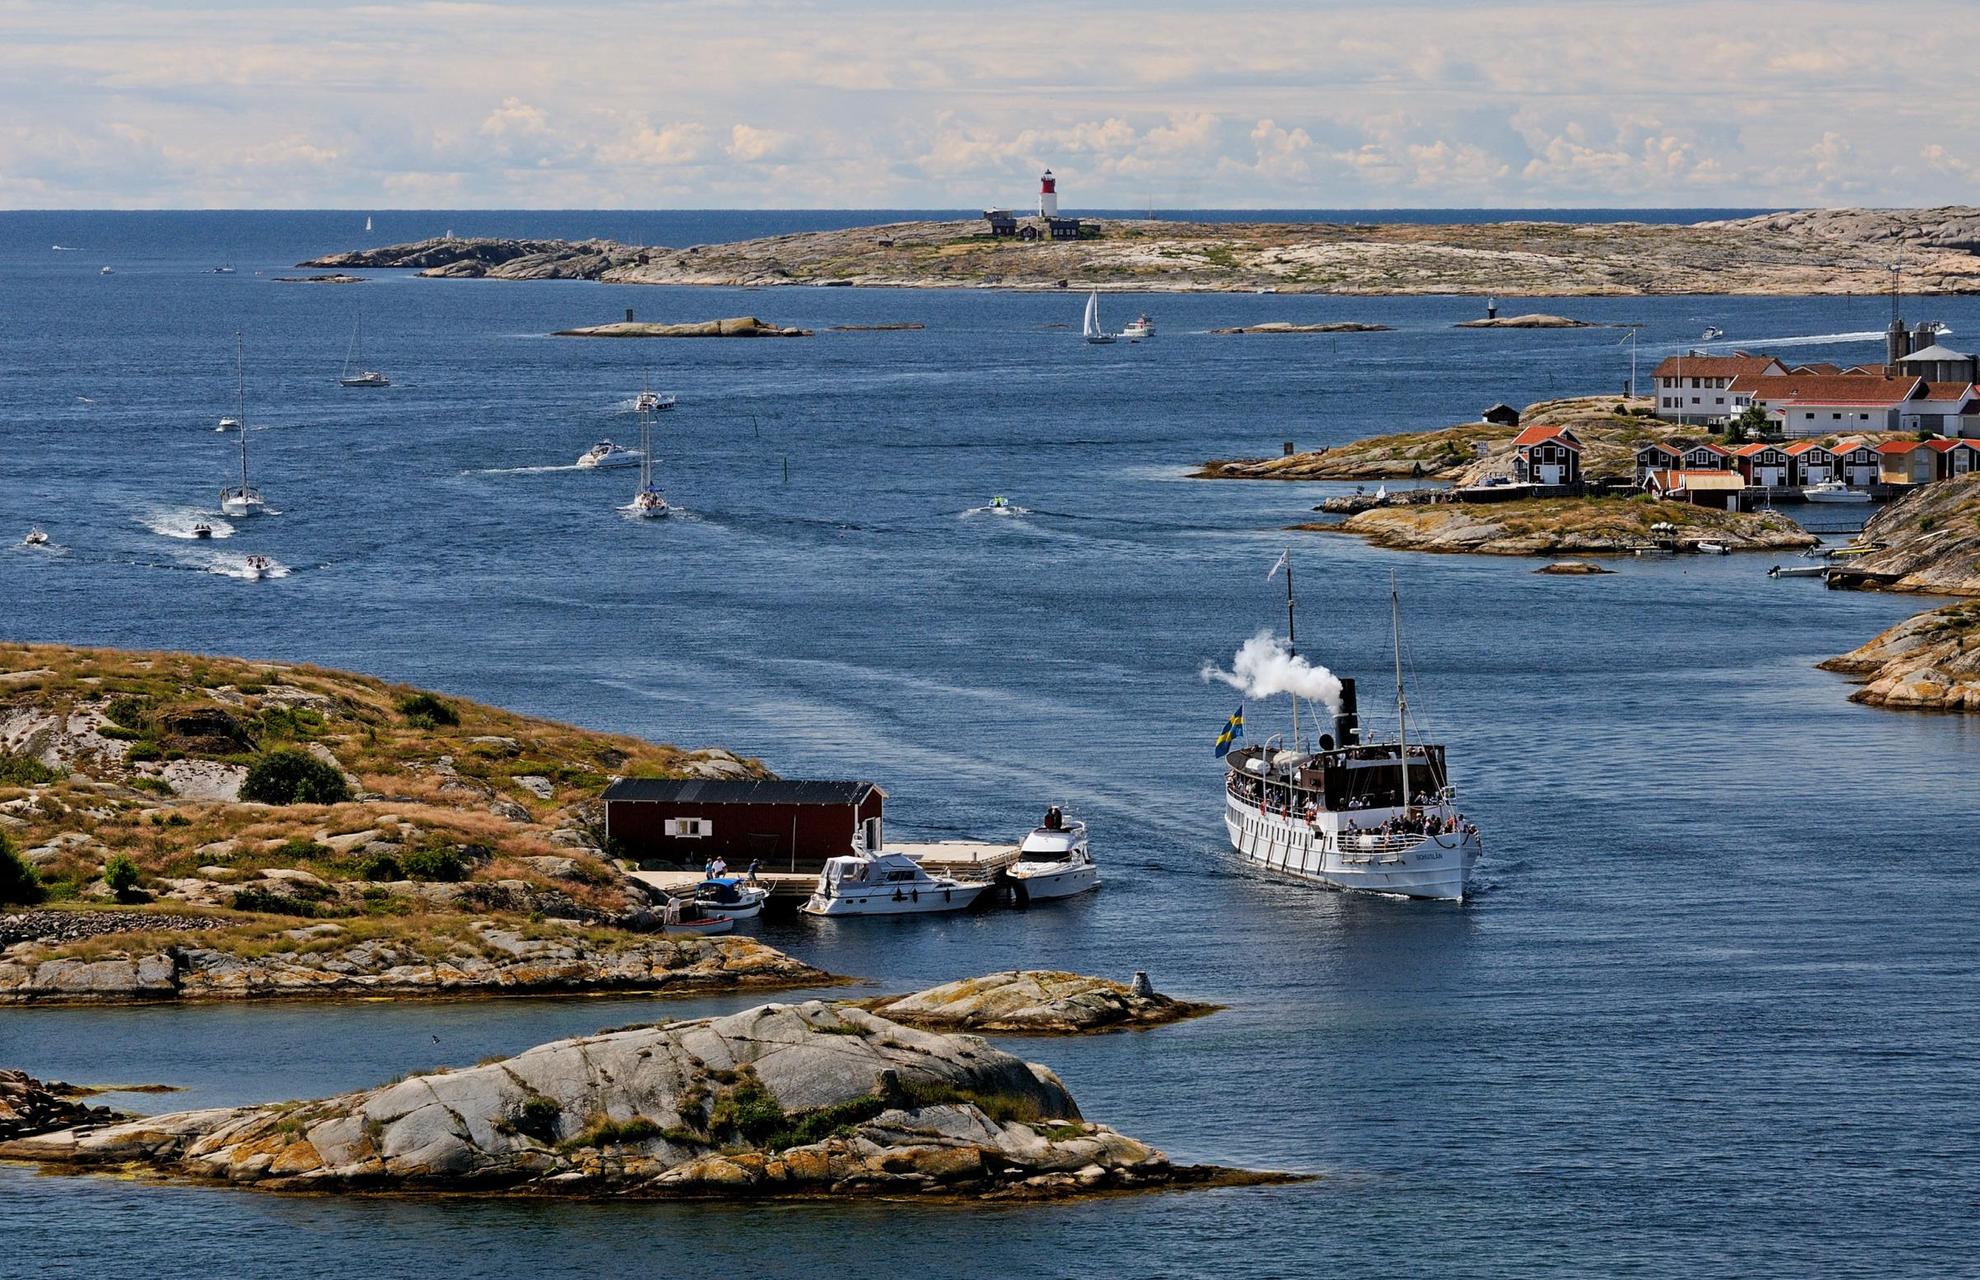 A steam boat and other sailing boats cruise between smaller islands in the archipelago. A bigger island in the background has a lighthouse.